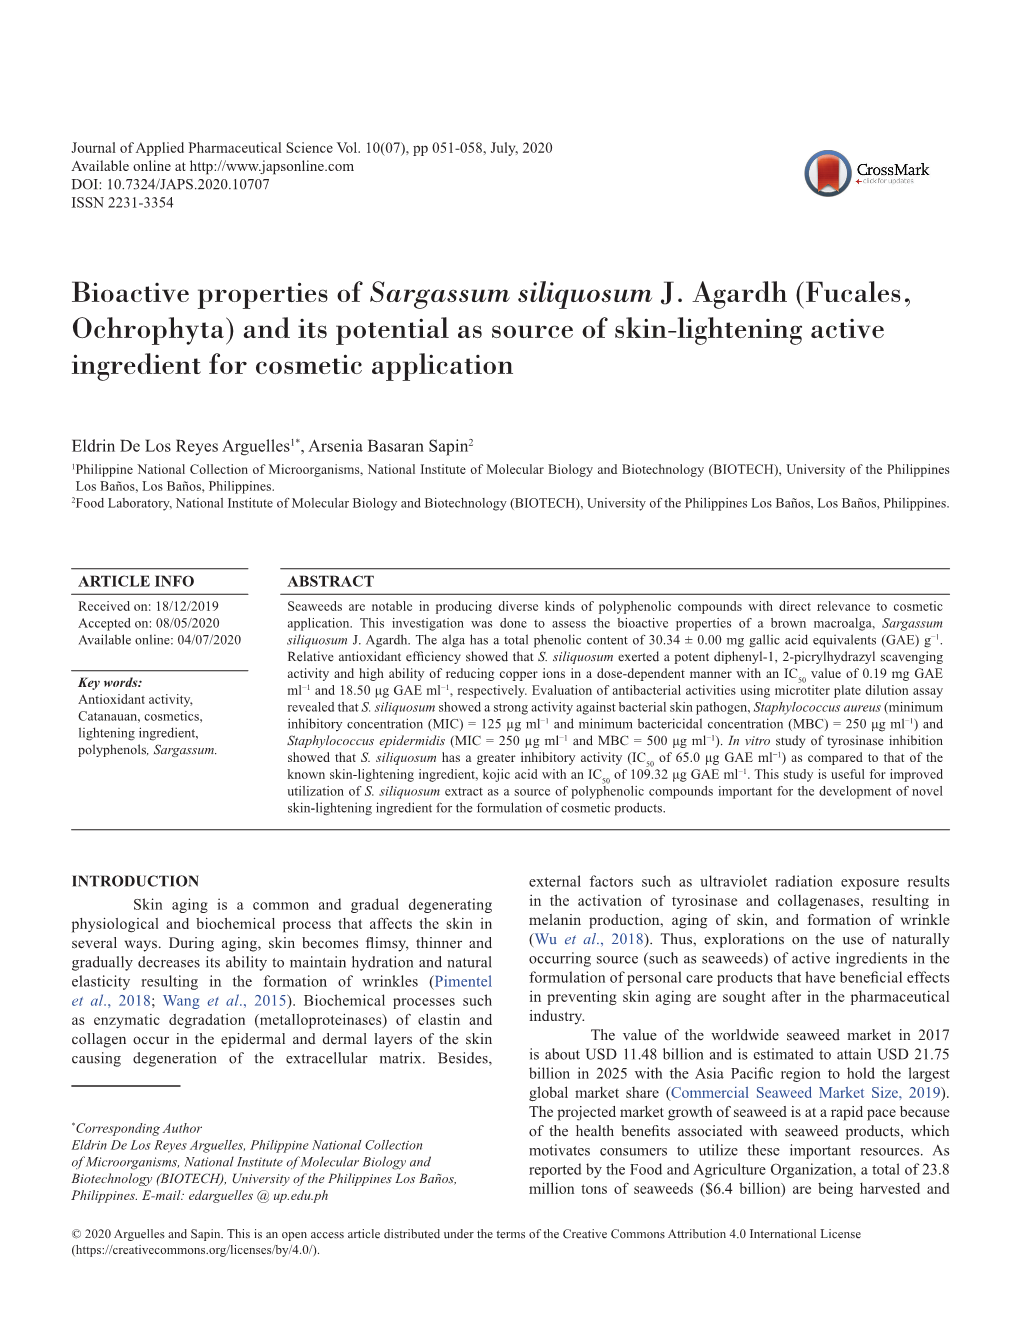 Bioactive Properties of Sargassum Siliquosum J. Agardh (Fucales, Ochrophyta) and Its Potential As Source of Skin-Lightening Active Ingredient for Cosmetic Application